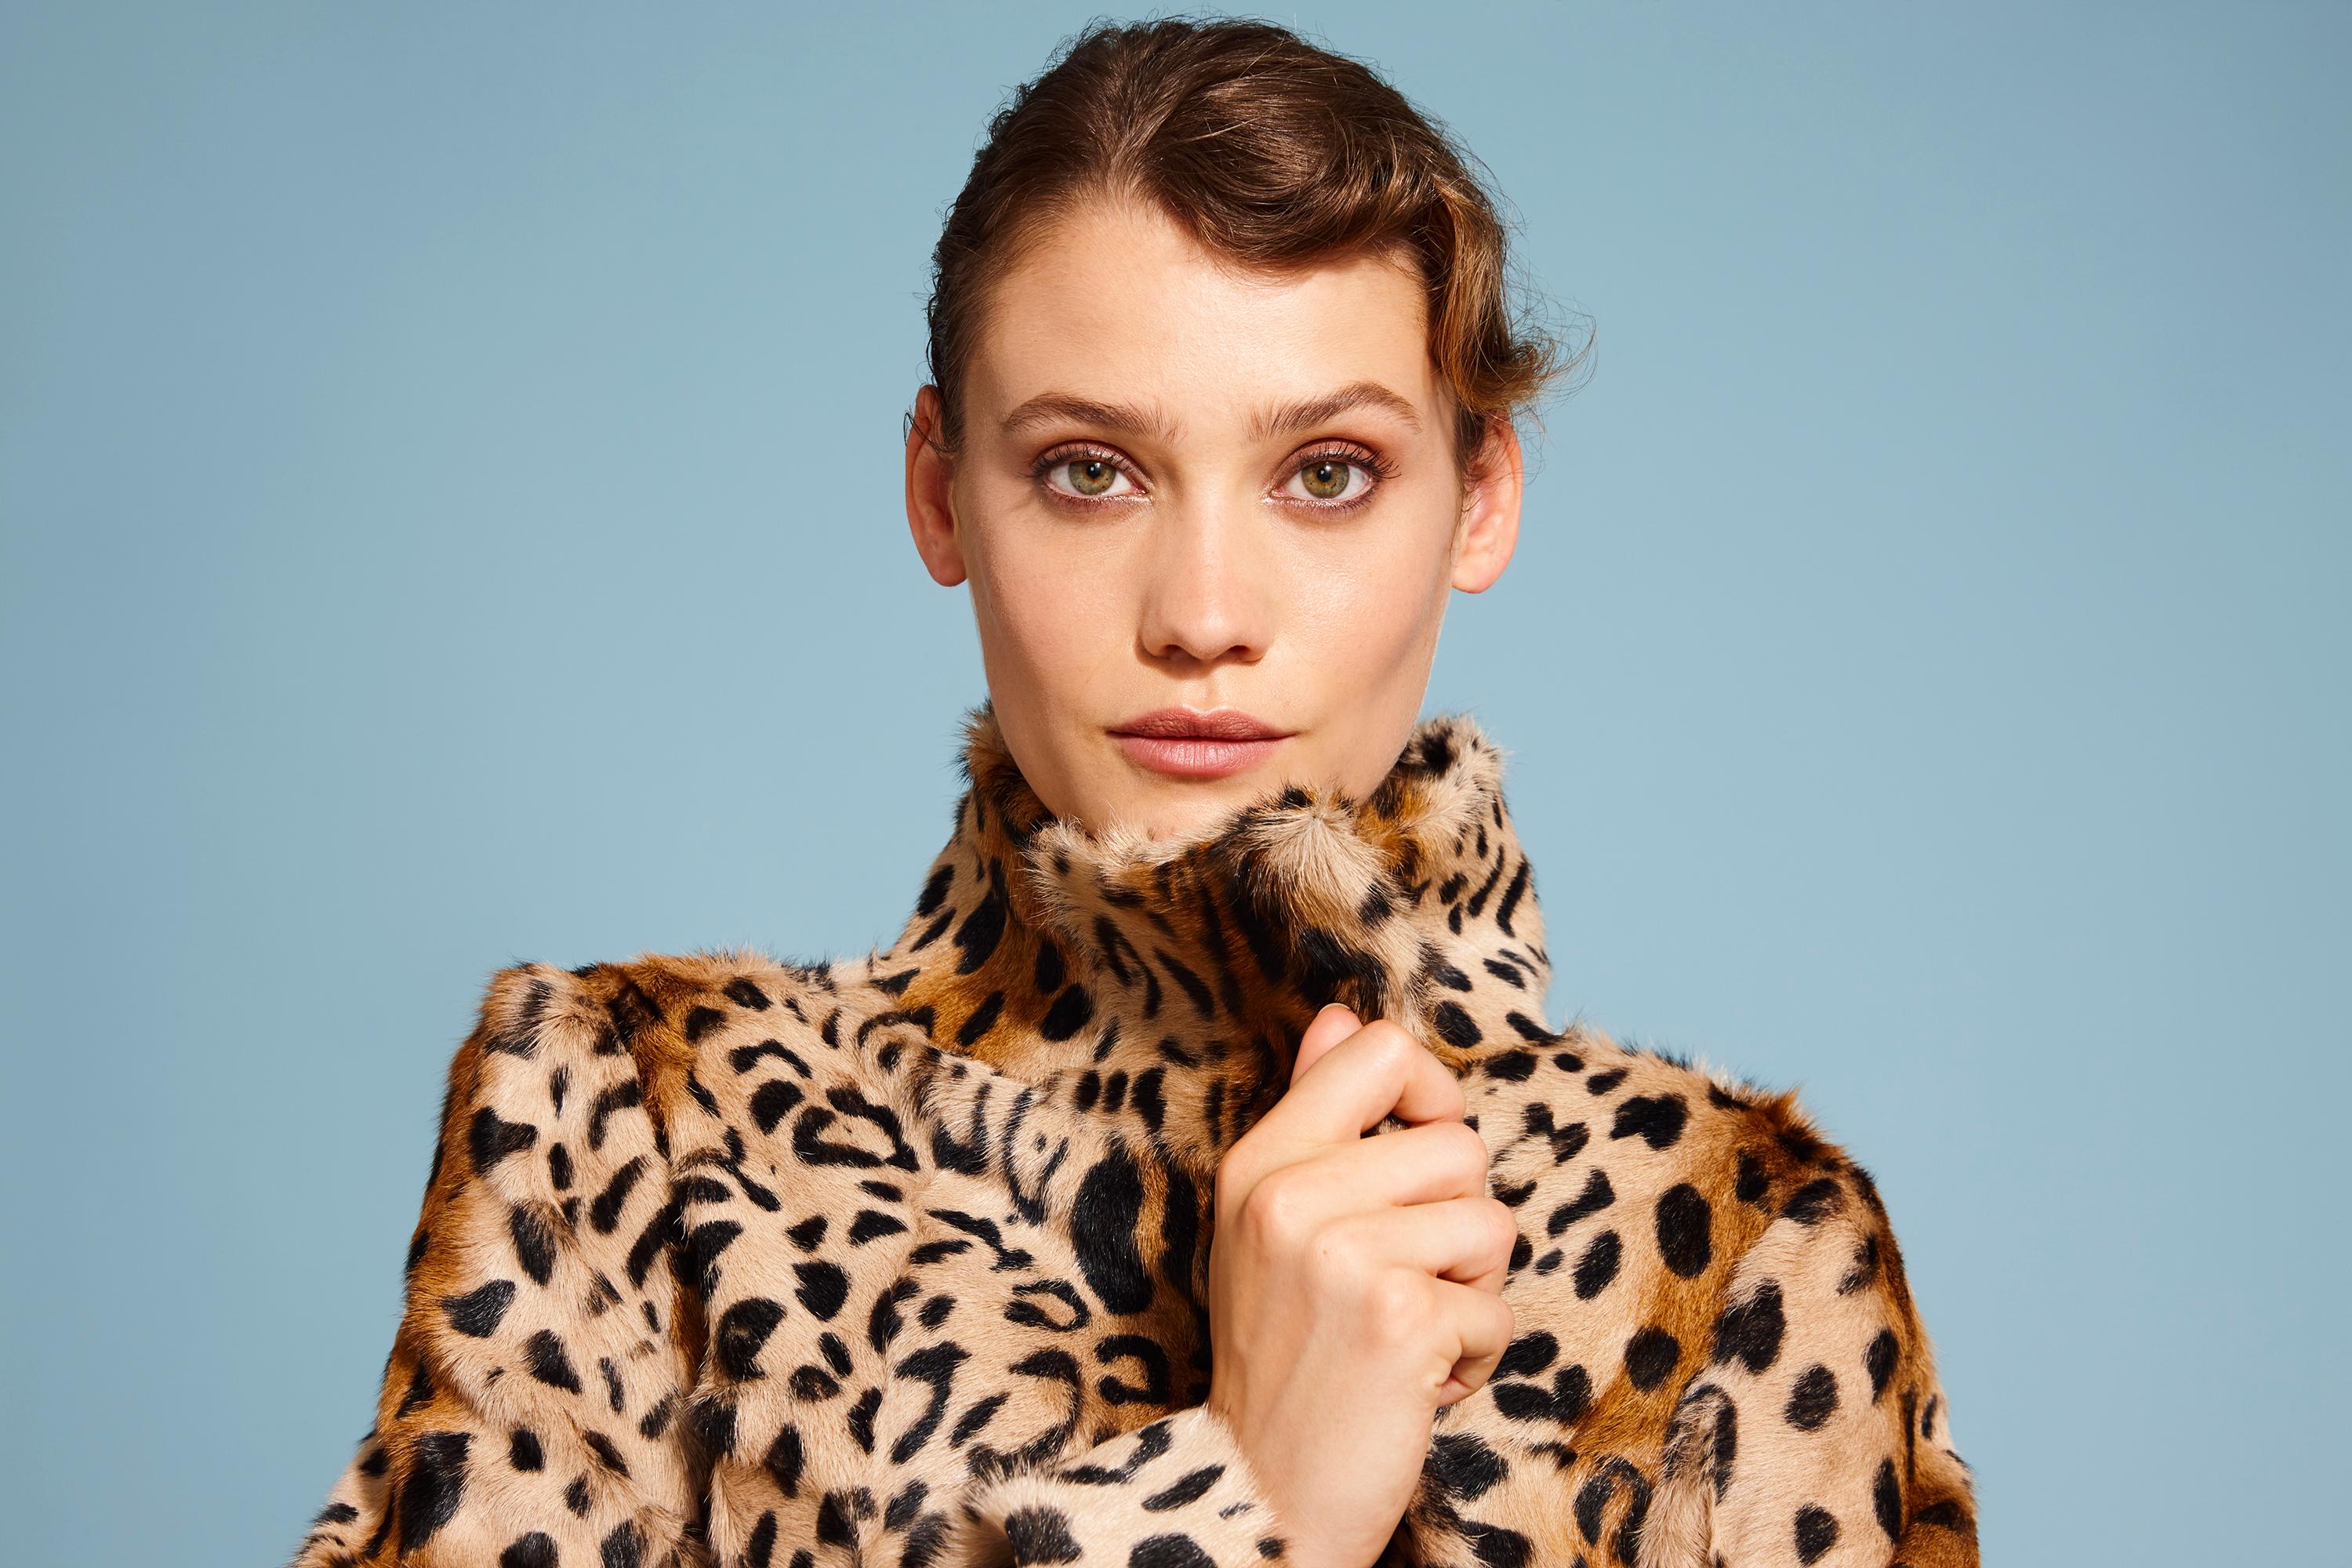 Verheyen London High Collar Leopard Print Coat Natural Goat Hair Fur Size uk 12

This Leopard print coat is Verheyen London’s classic staple for effortless style and glamour.   Verheyen London is a luxury brand who specialises in outerwear that will